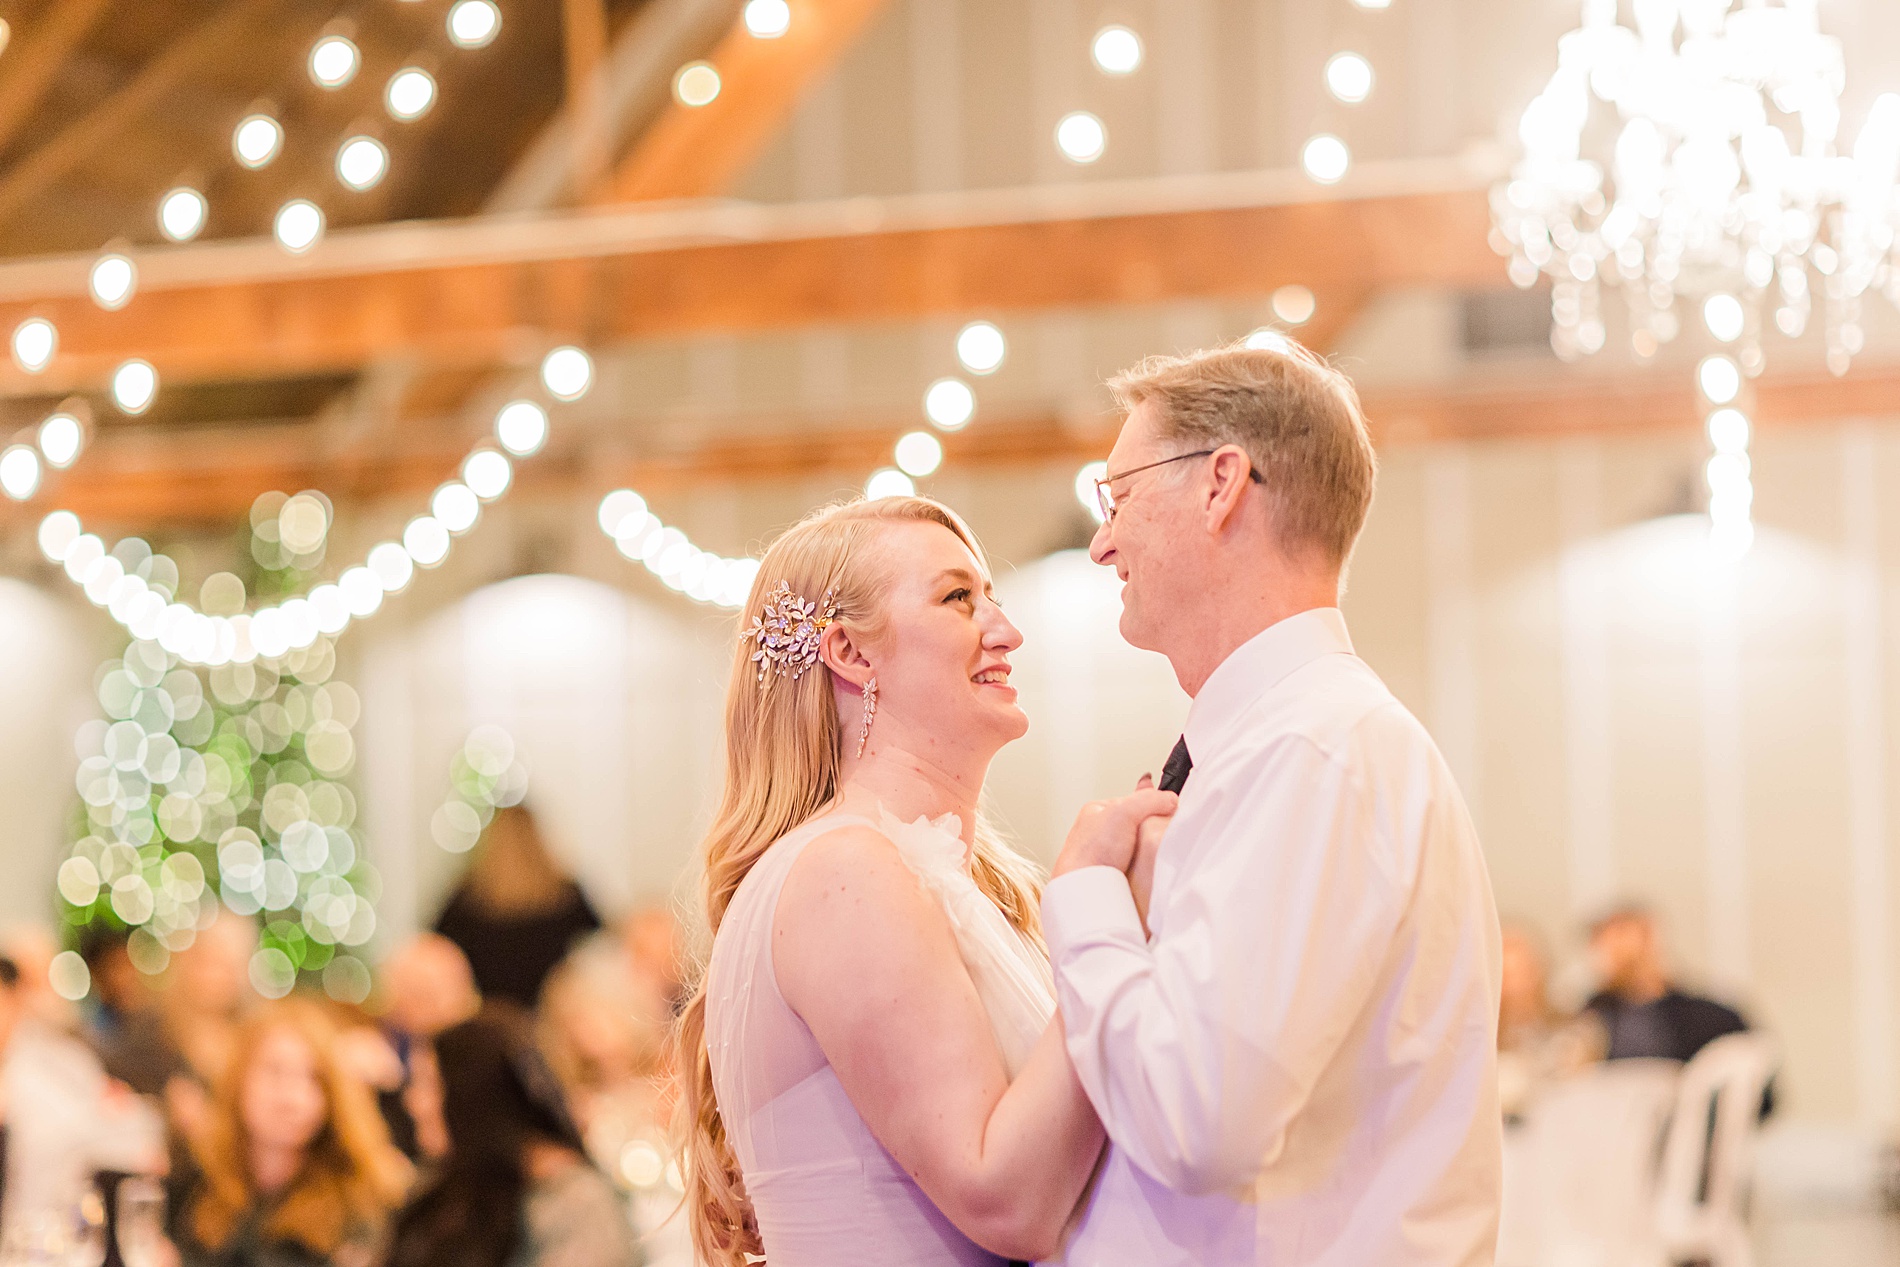 traditional father daughter dance photos